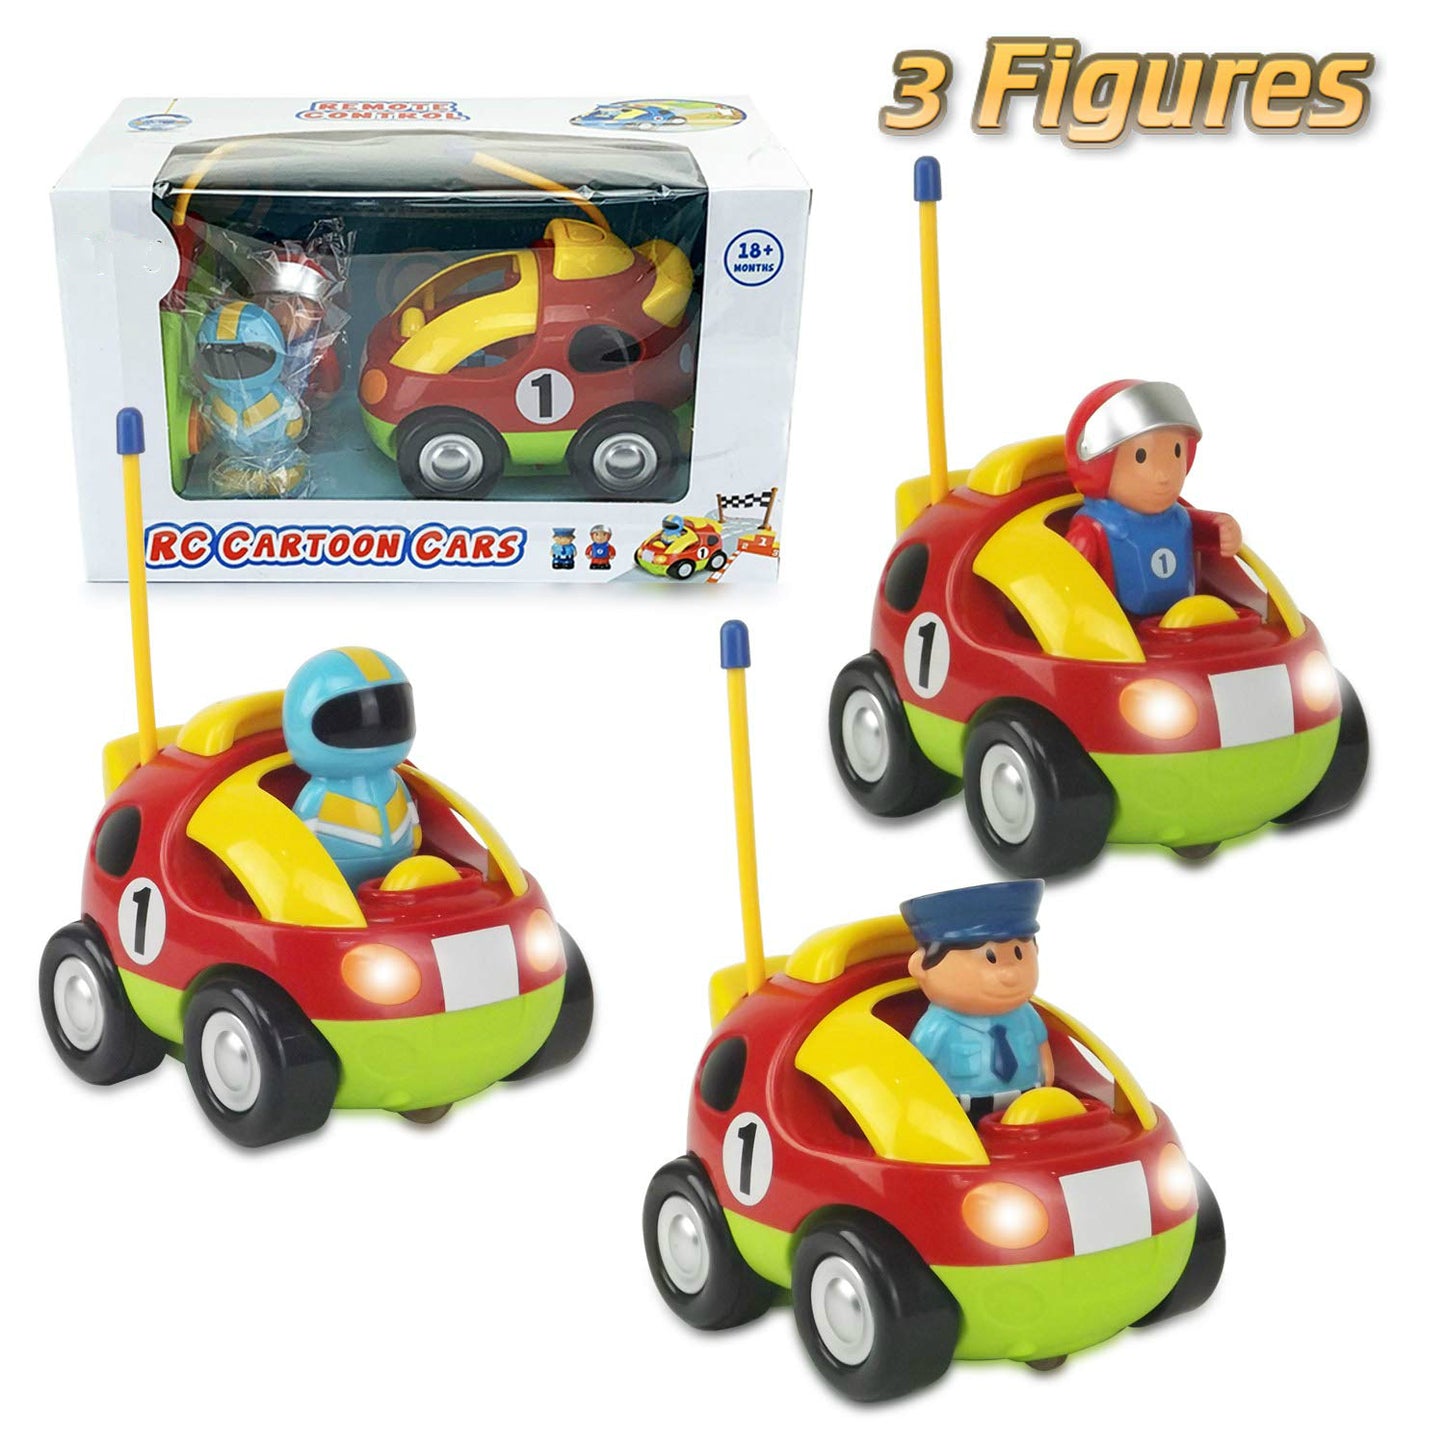 Cartoon R/C Race Car Radio Control Toy for Toddlers (English Packaging)